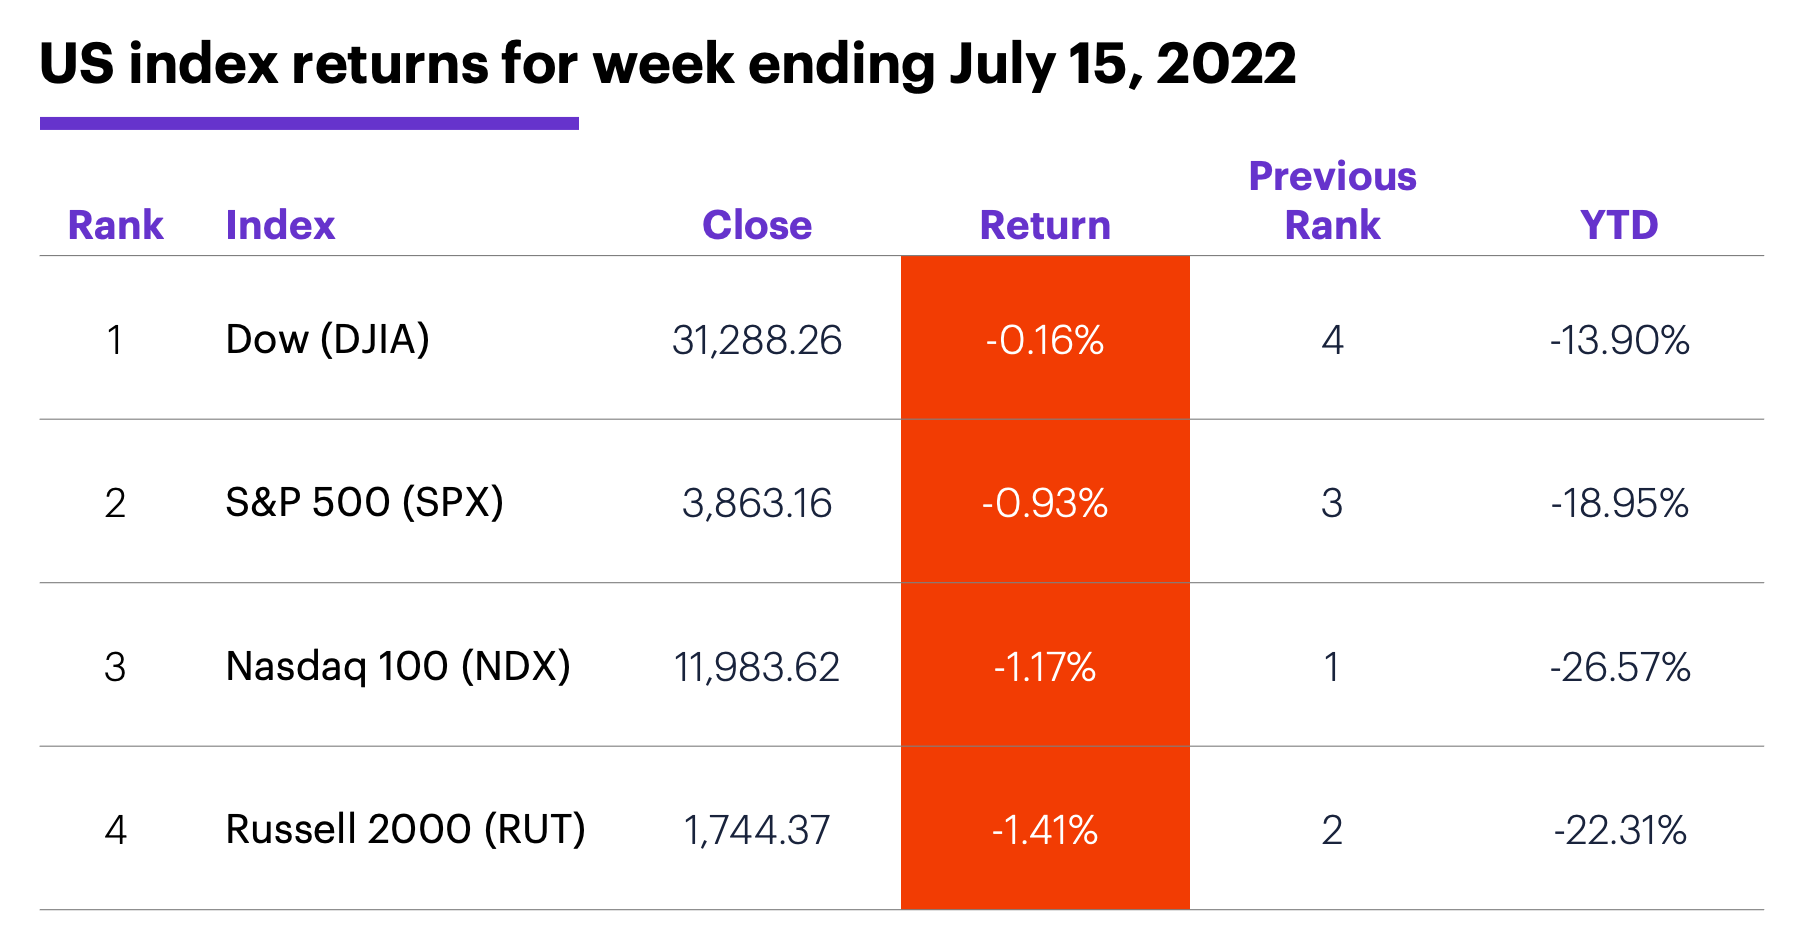 US stock index performance table for week ending 7/15/22. S&P 500 (SPX), Nasdaq 100 (NDX), Russell 2000 (RUT), Dow Jones Industrial Average (DJIA).